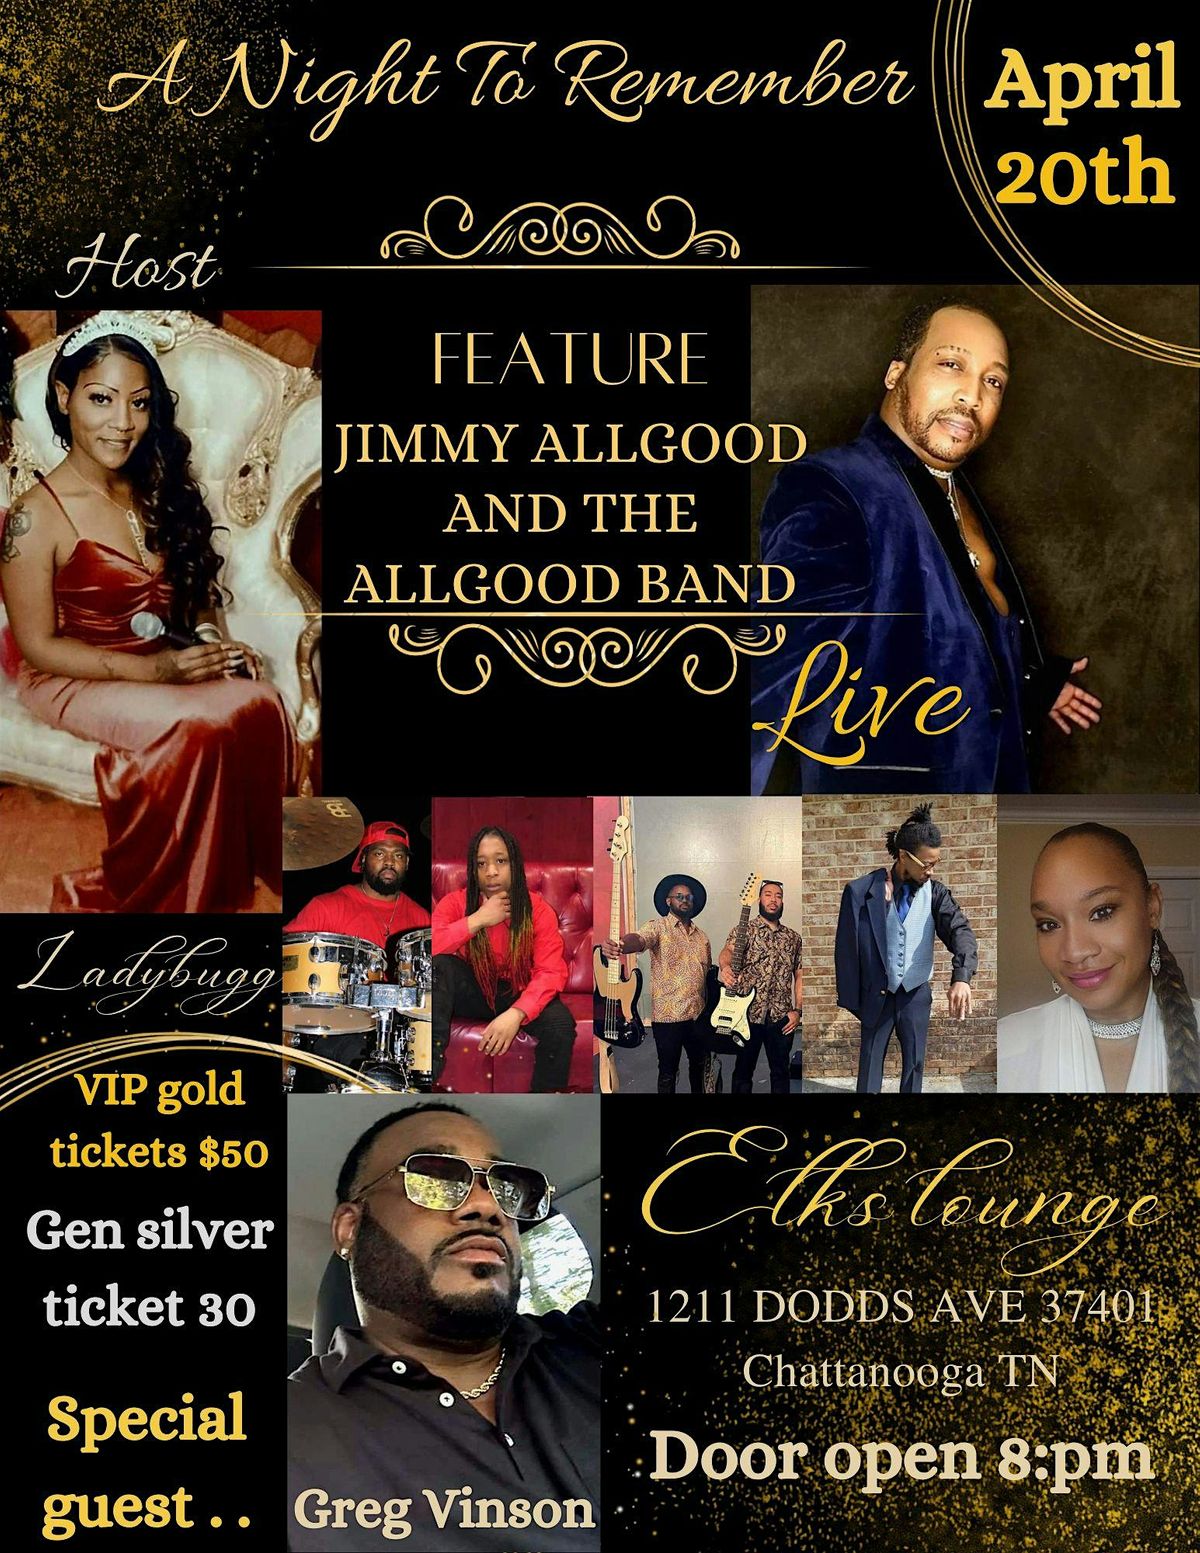 A night to remember Featuring Jimmy Allgood and the Allgood band